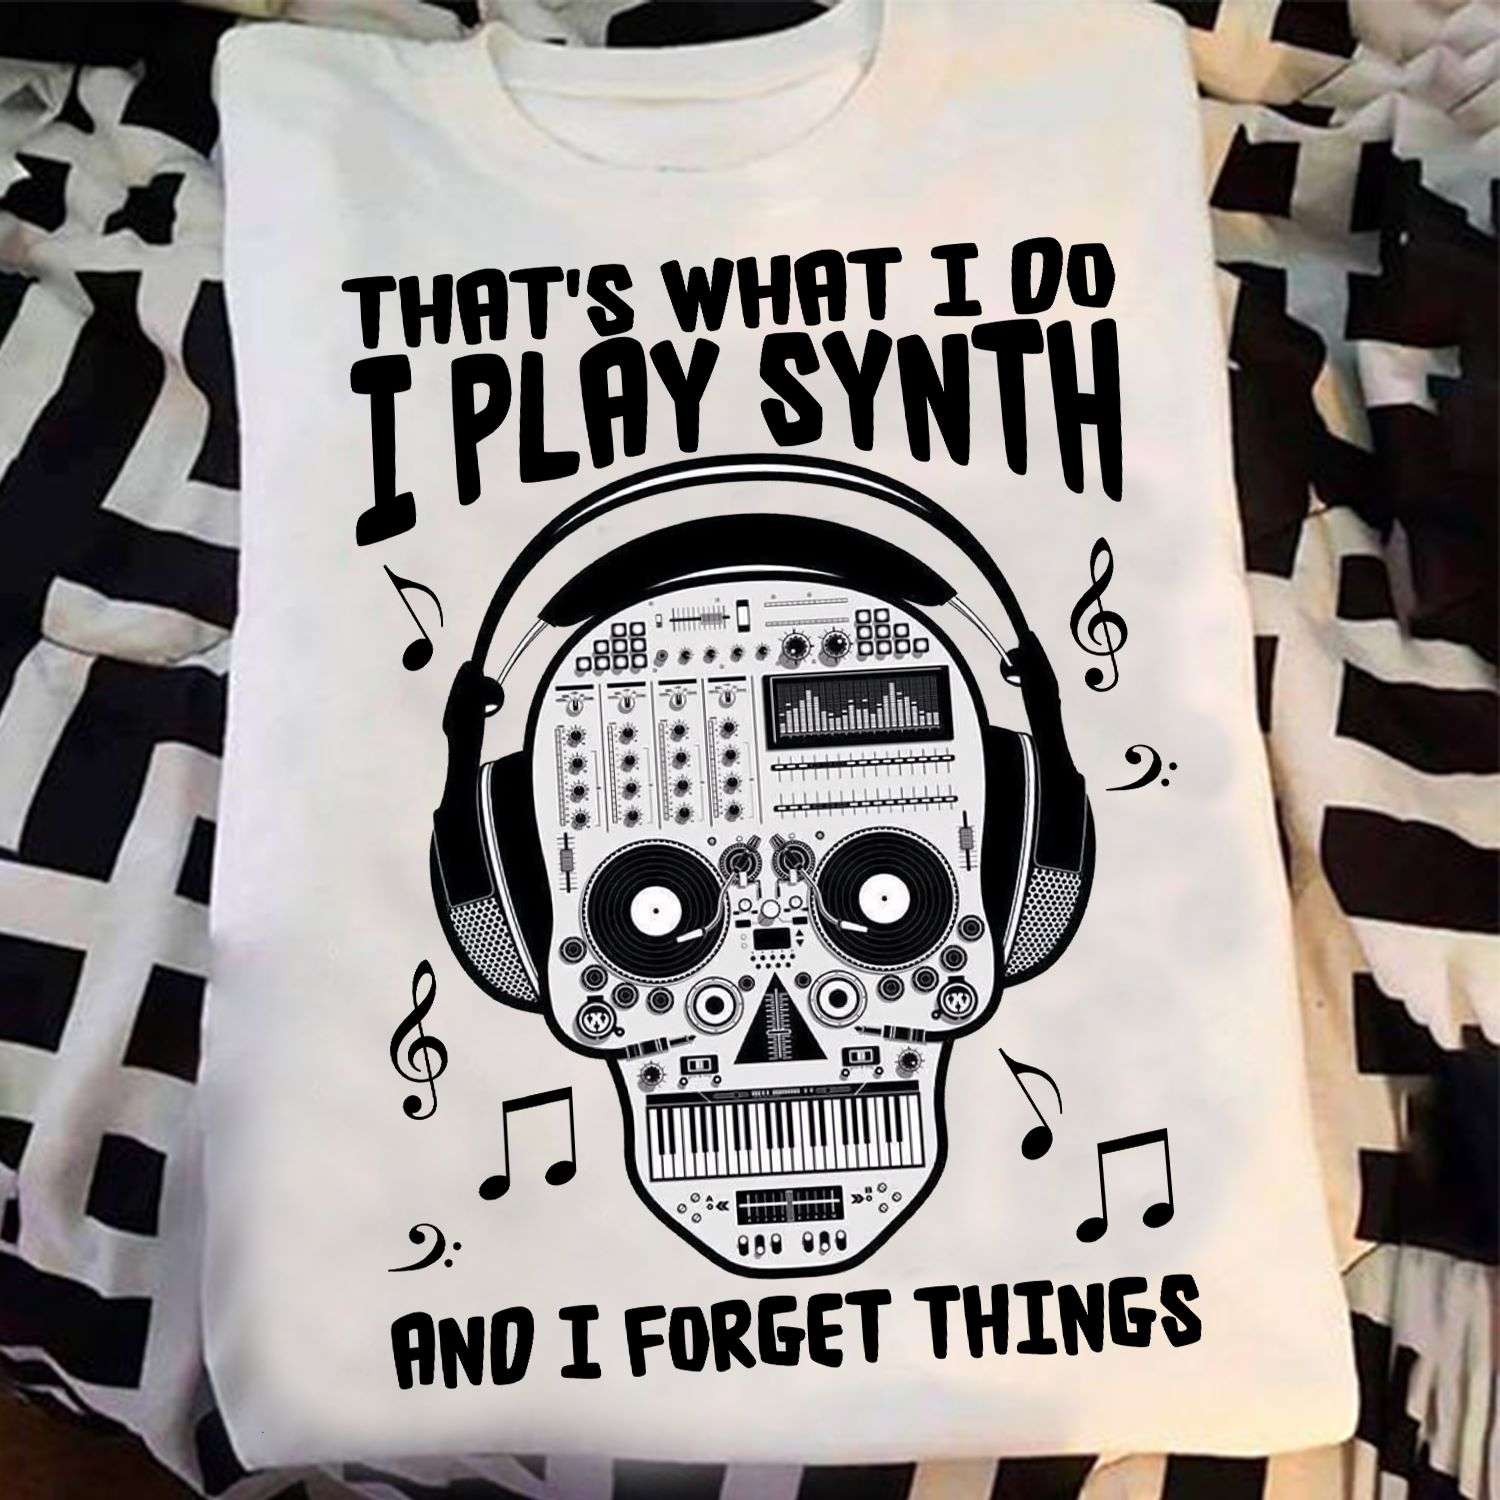 That's what I do I play synth and I forget things - Synth music play, skull listening to music